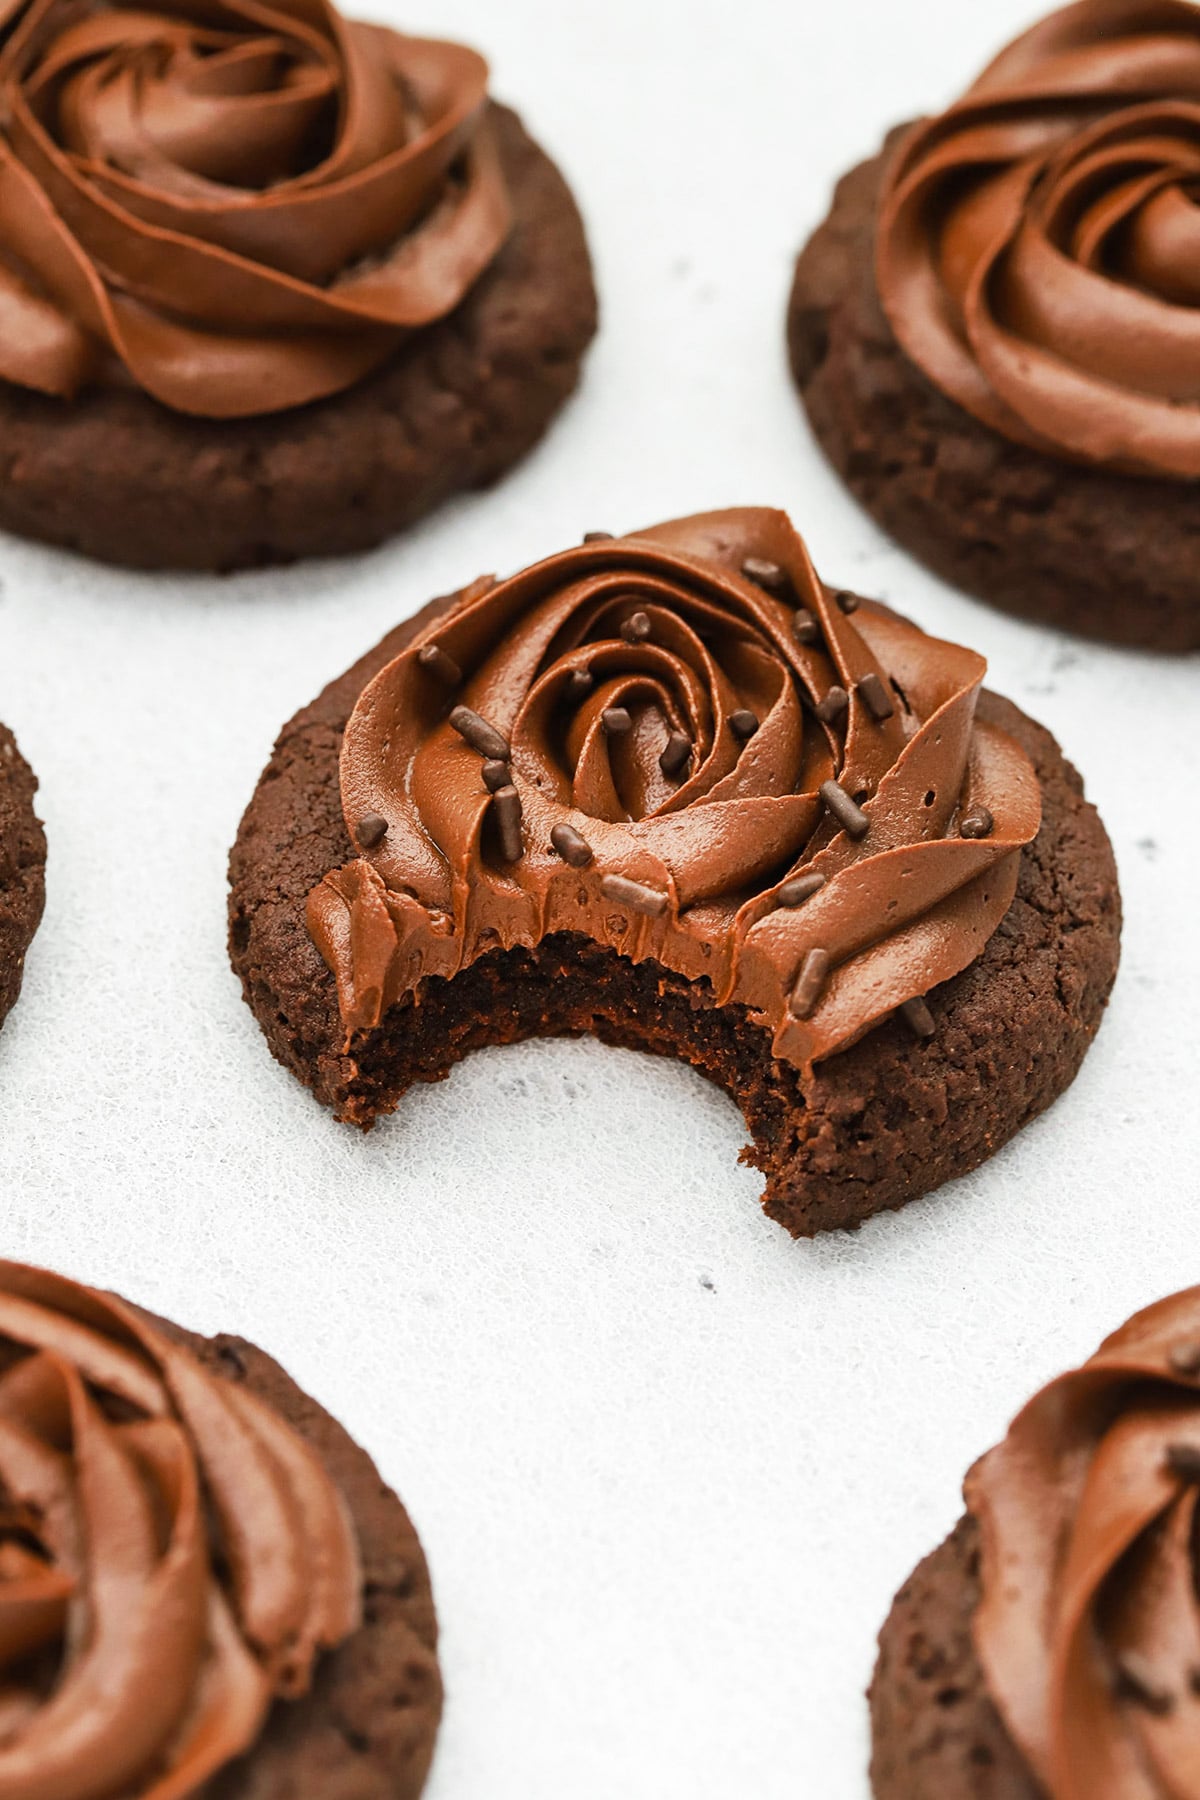 Front view of gluten-free crumbl chocolate cake cookies with chocolate frosting. One cookie has a bite taken out of it revealing the soft cakey center.